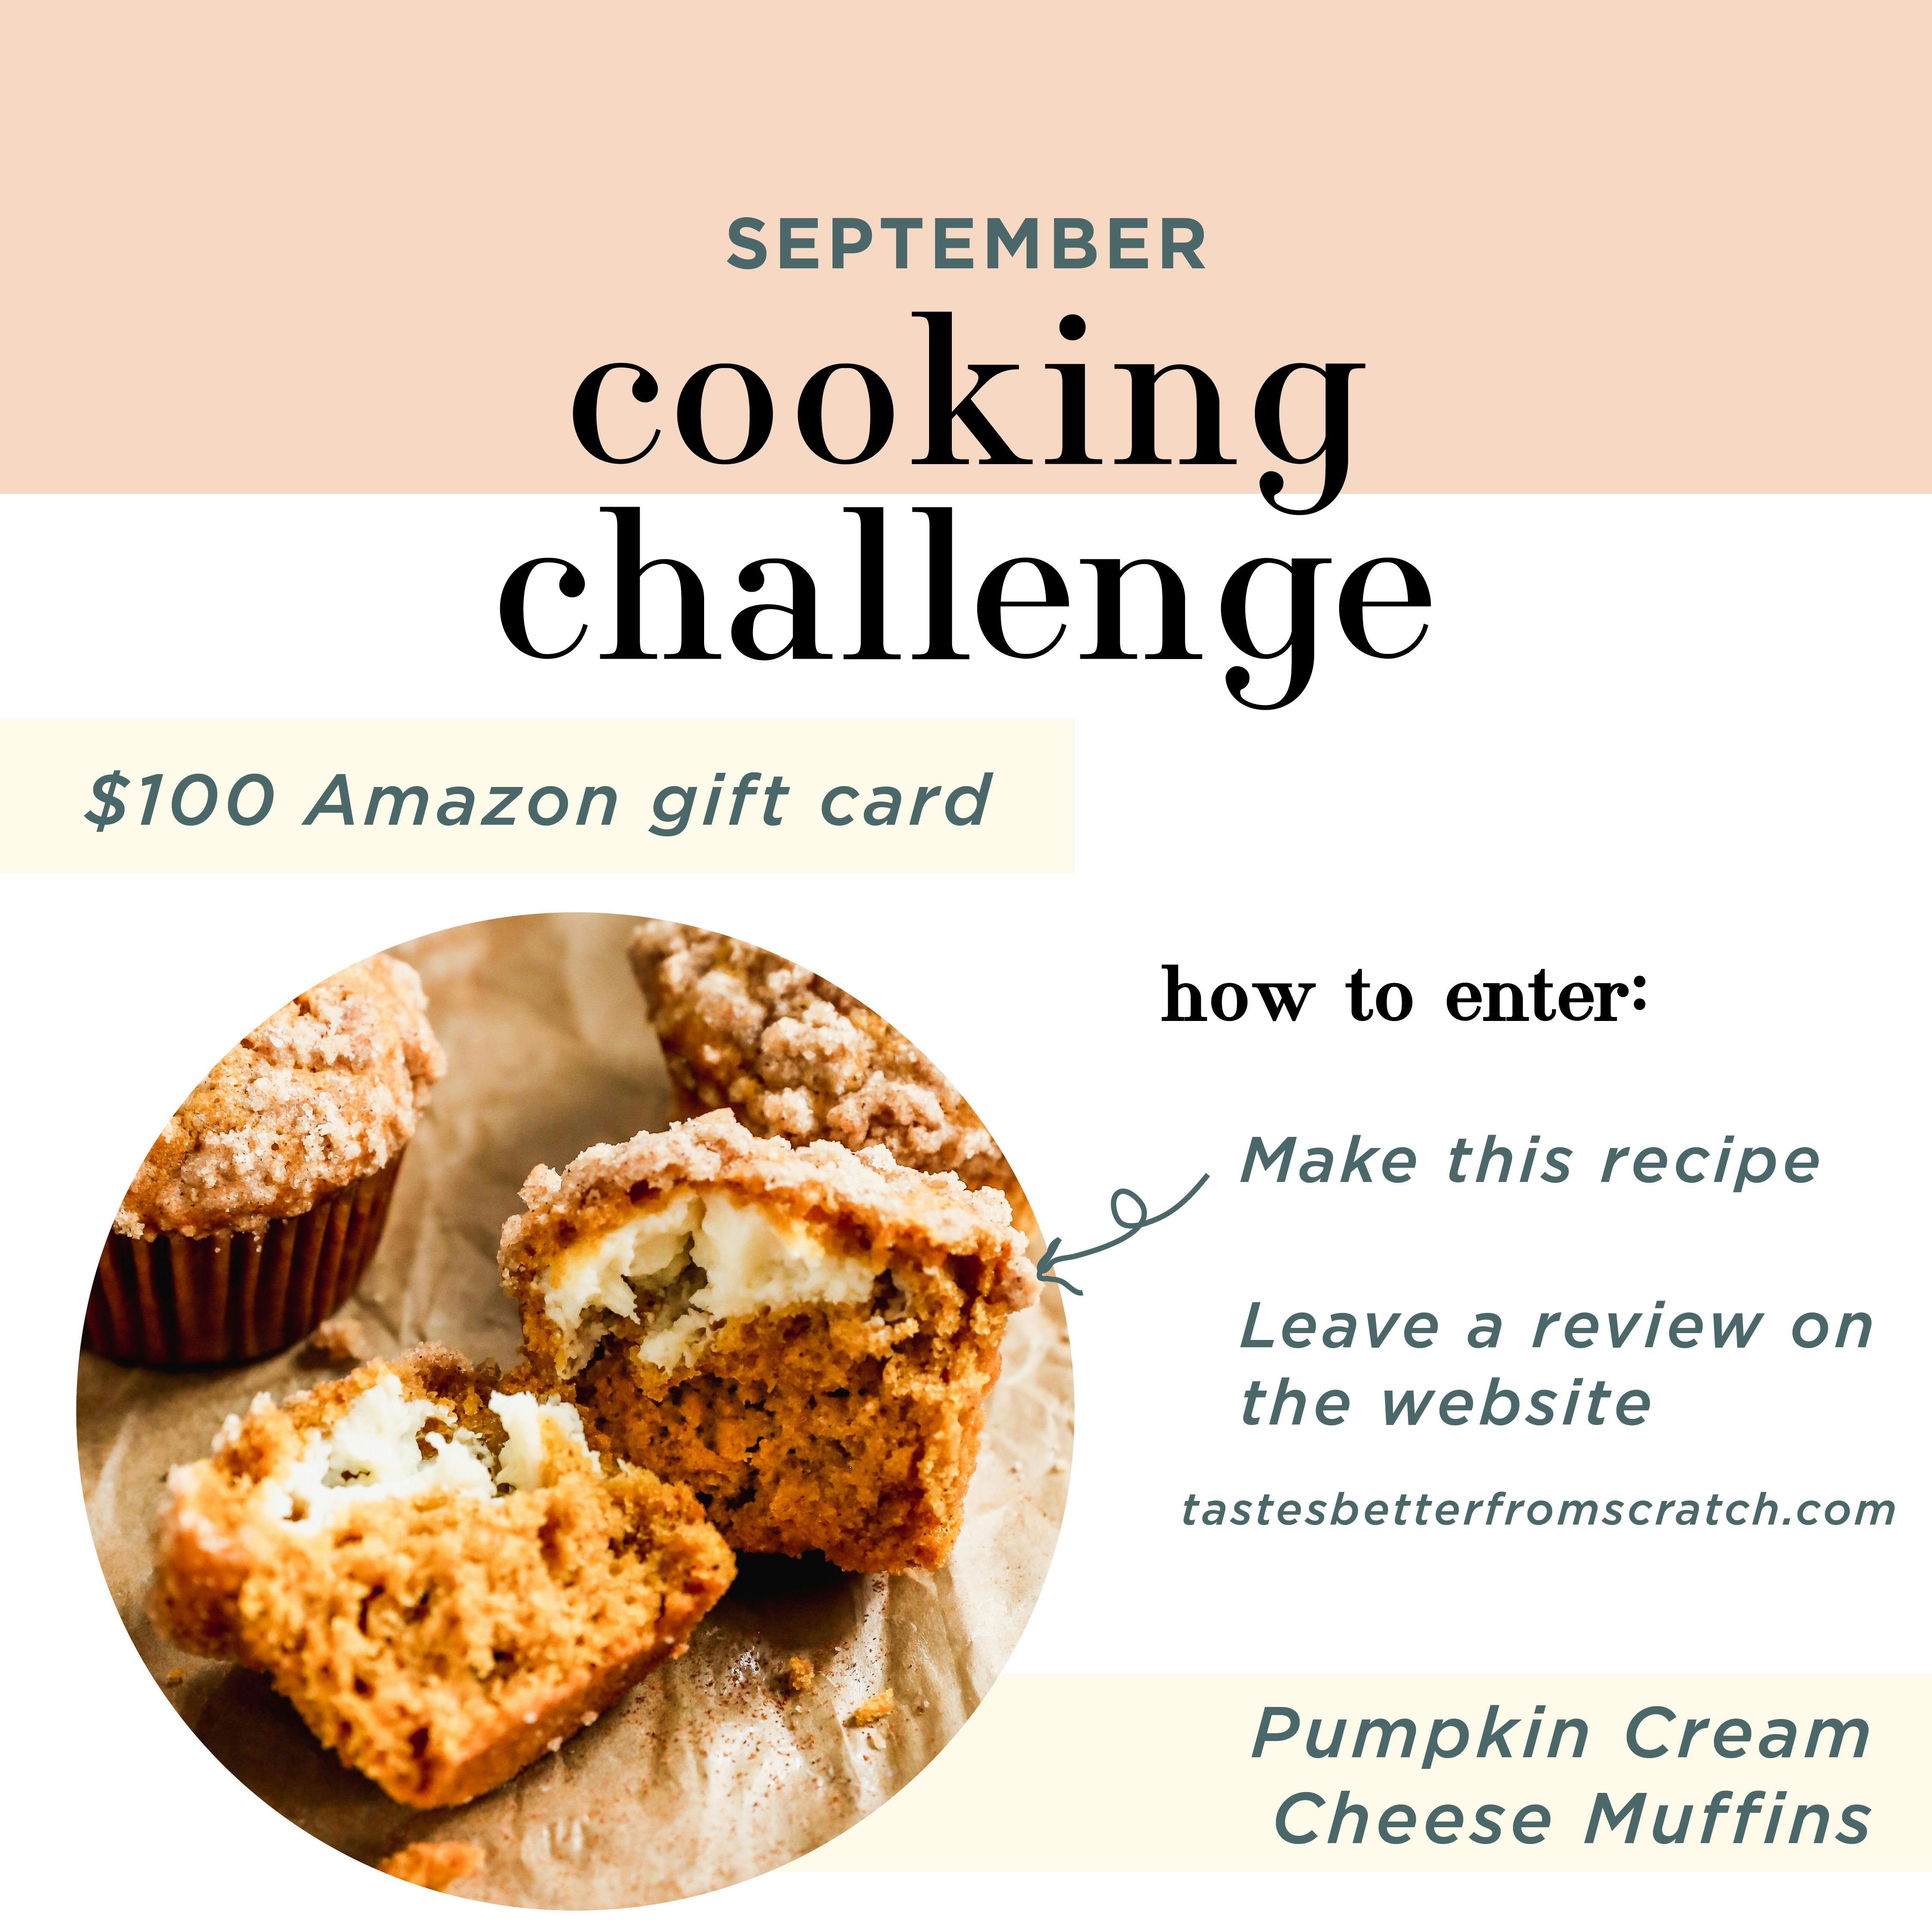 September Cooking Challenge: Pumpkin Cream Cheese Muffins- win a $100 Amazon gift card! Just make this recipe and leave a review on the website